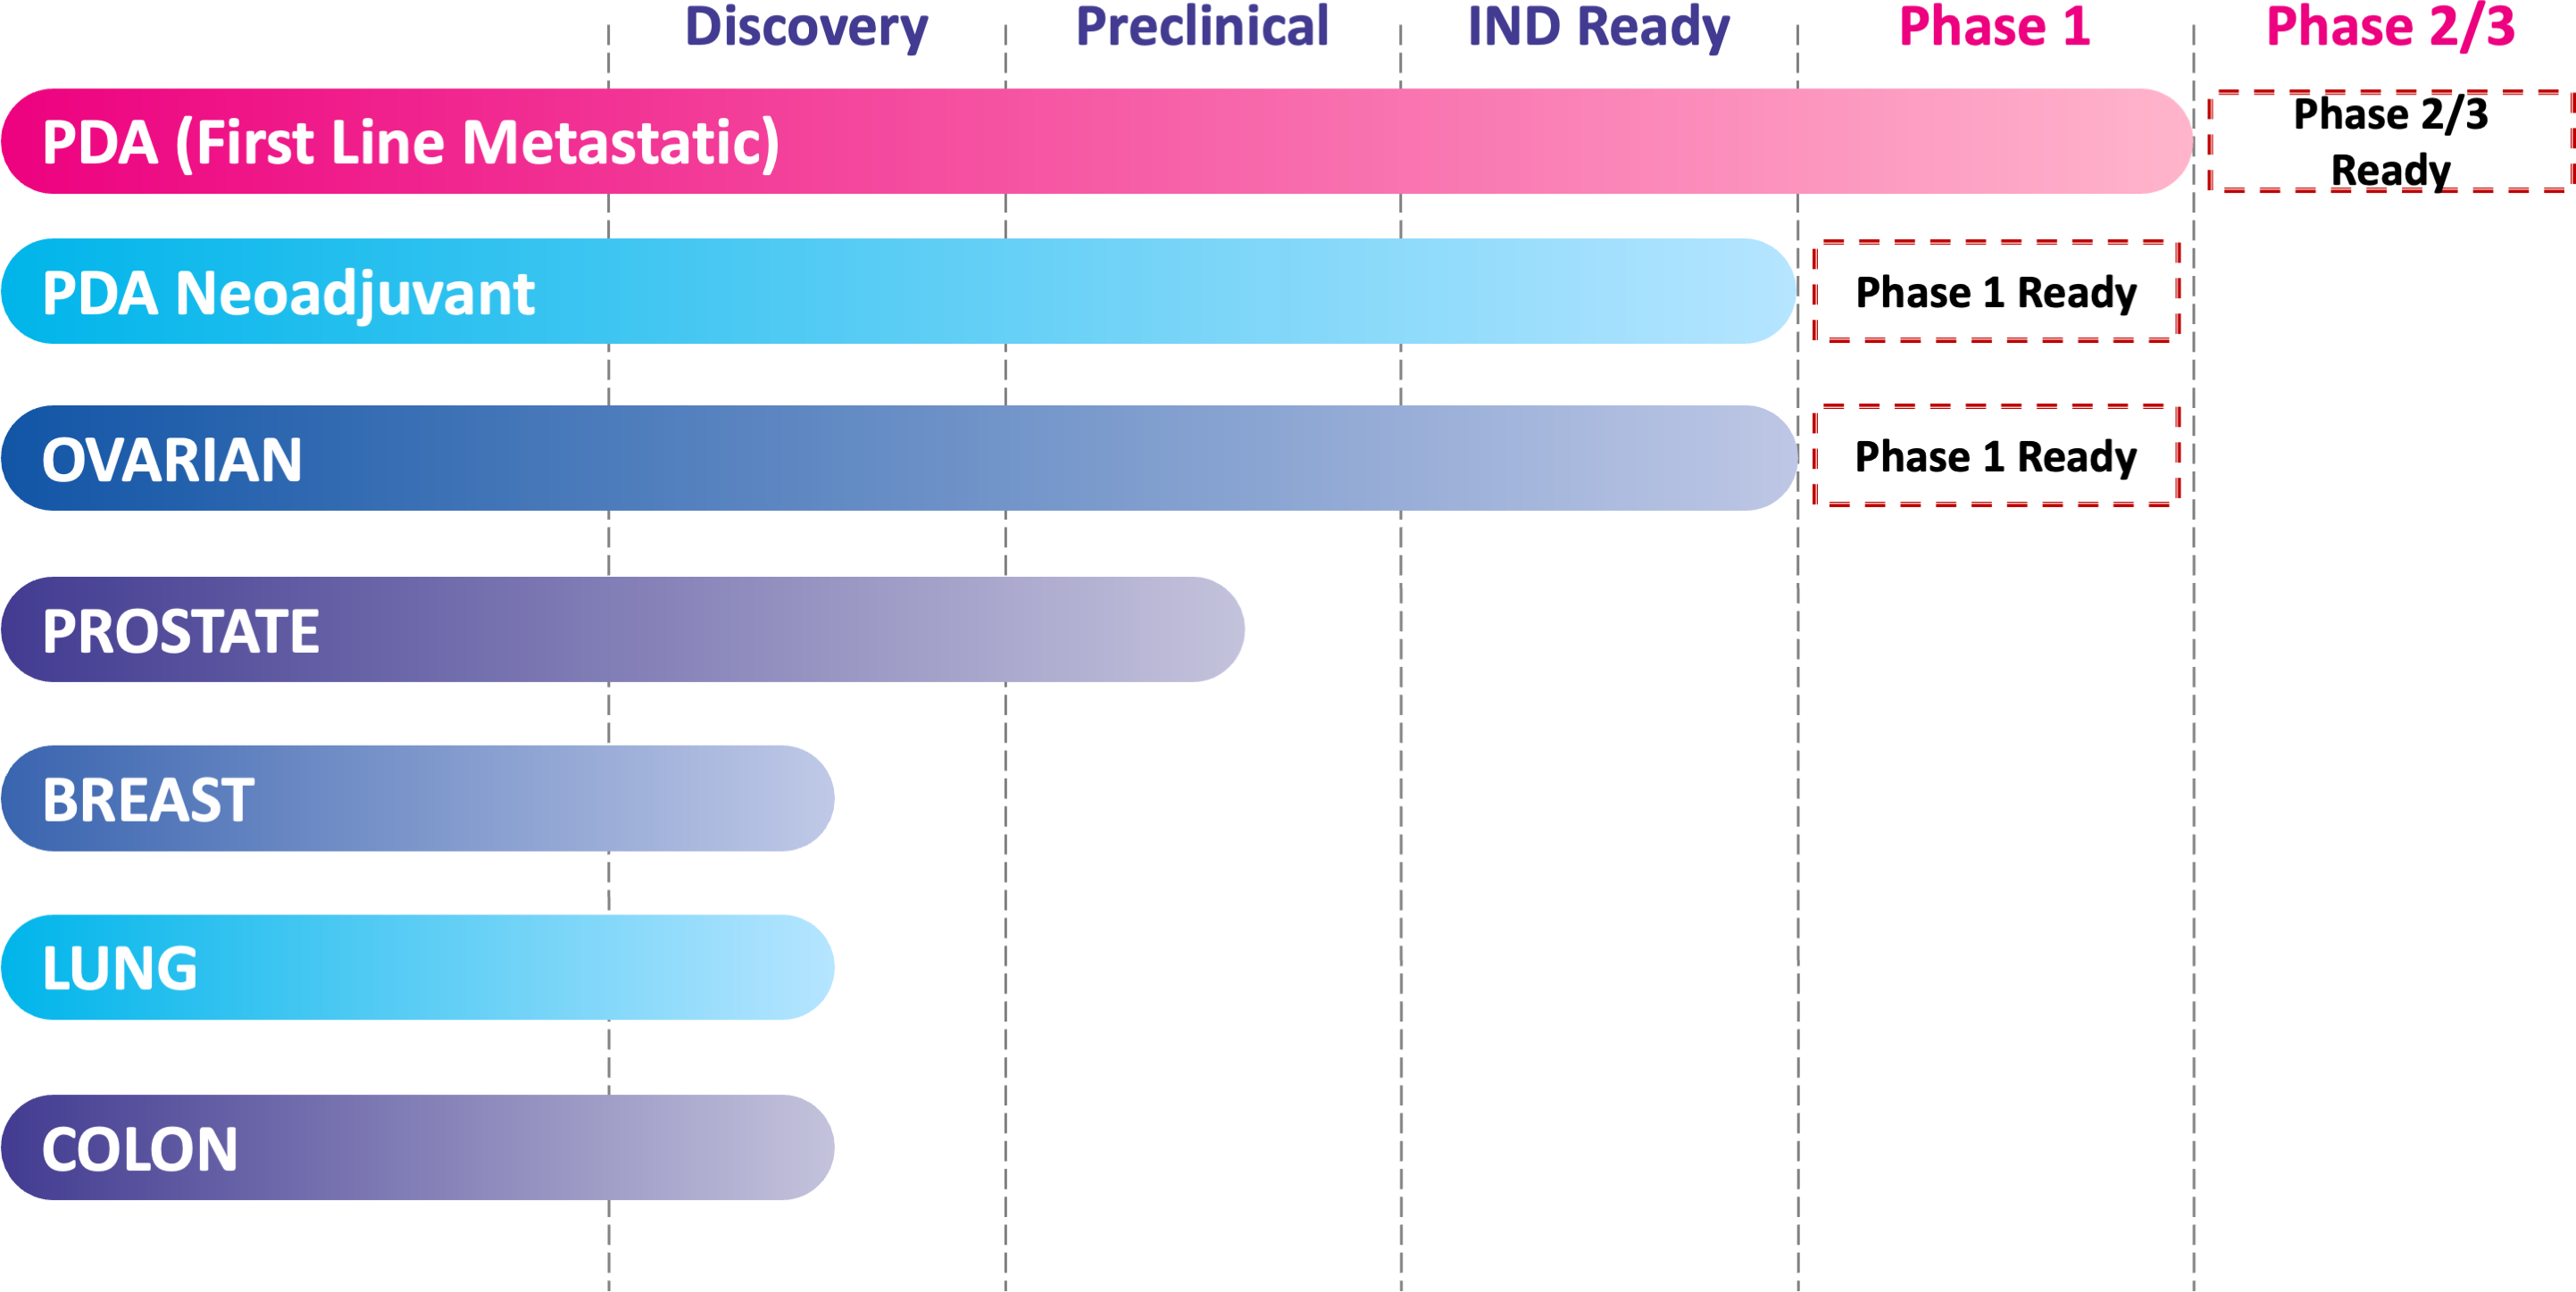 graph showing PDA (First Line Metastatic) as Phase 2/3 ready, PDA Neoadjuvant as Phase 1 ready, Ovarian as Phase 1 ready, Prostate as Preclinical, and Colon, Breast, and Lung as Discovery phase